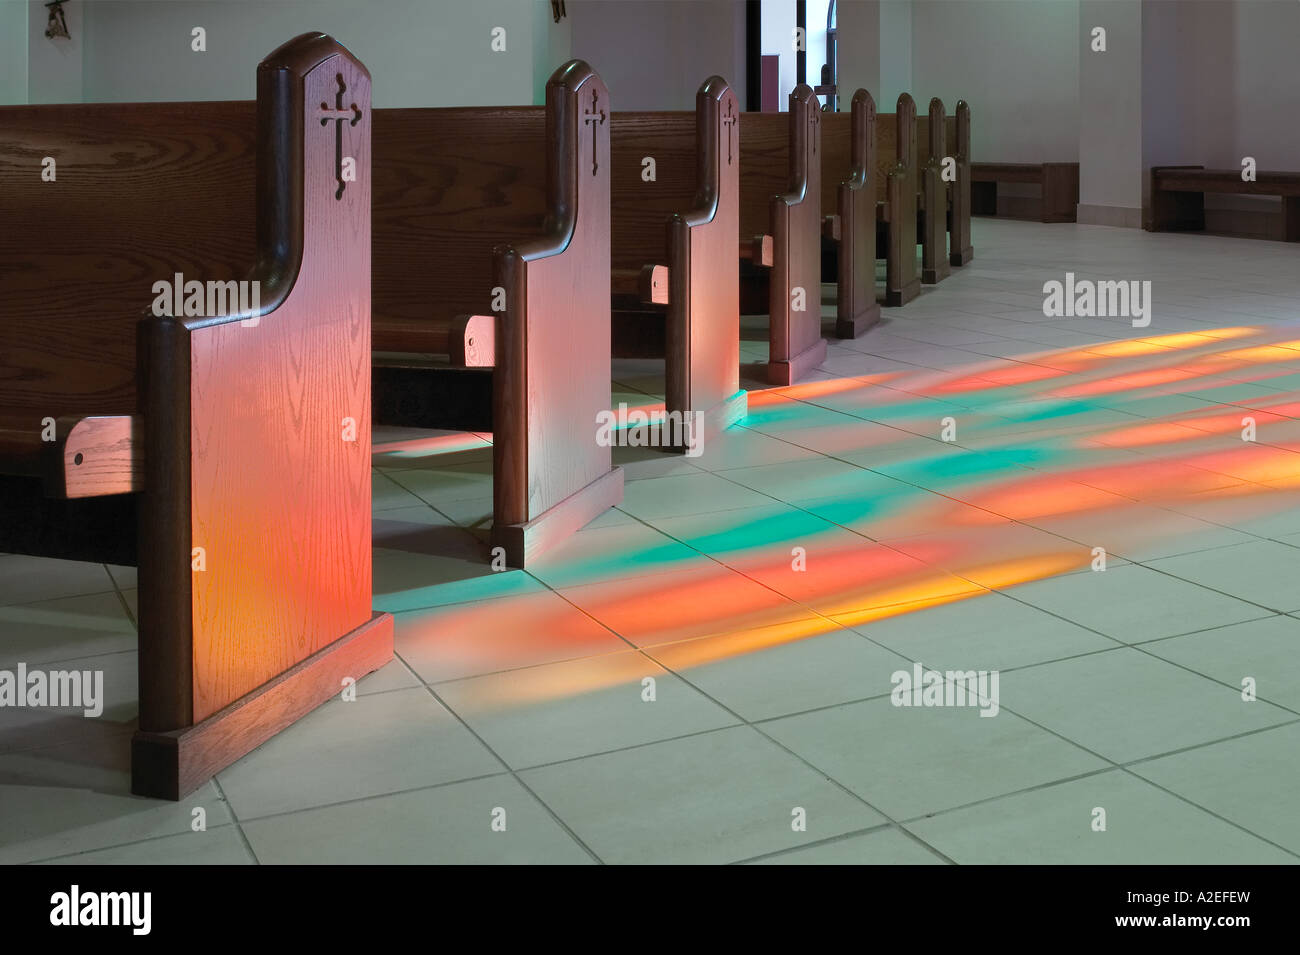 Church Pews With Light From Stained Glass Window  Shining On The Floor Making A Colorful Pattern In Roman Catholic Church, USA Stock Photo